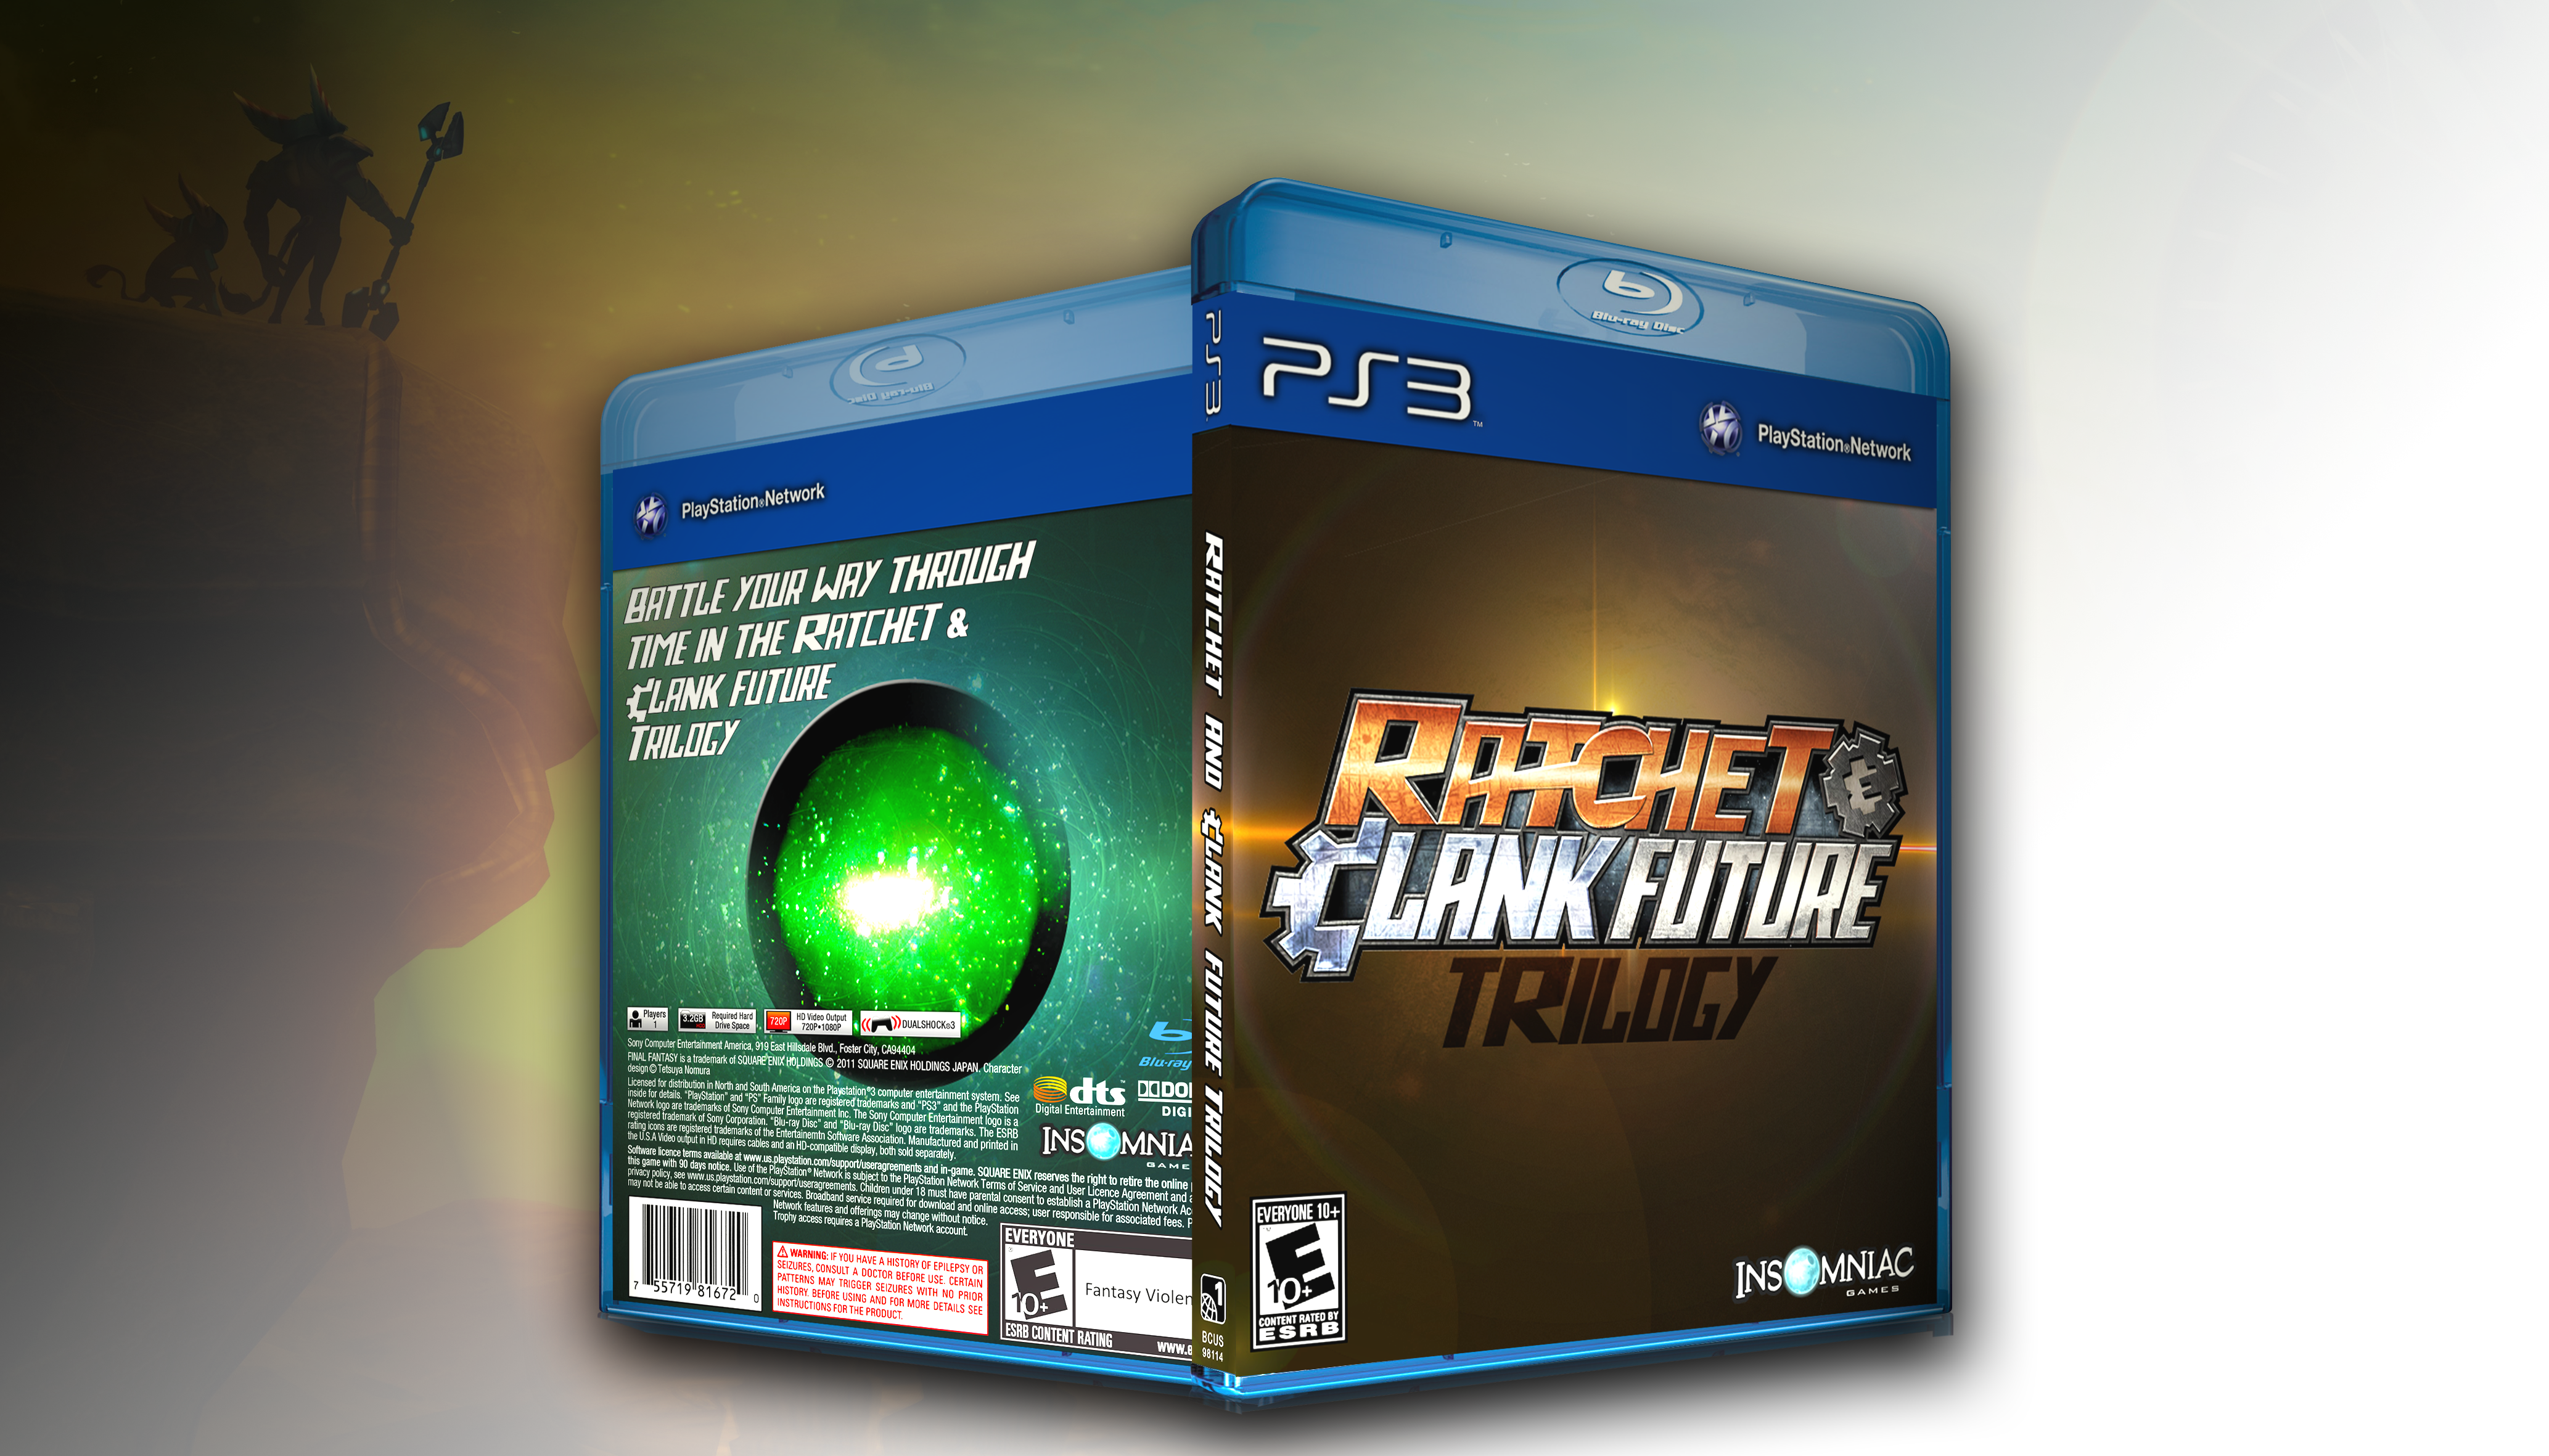 Ratchet and Clank future : Trilogy box cover